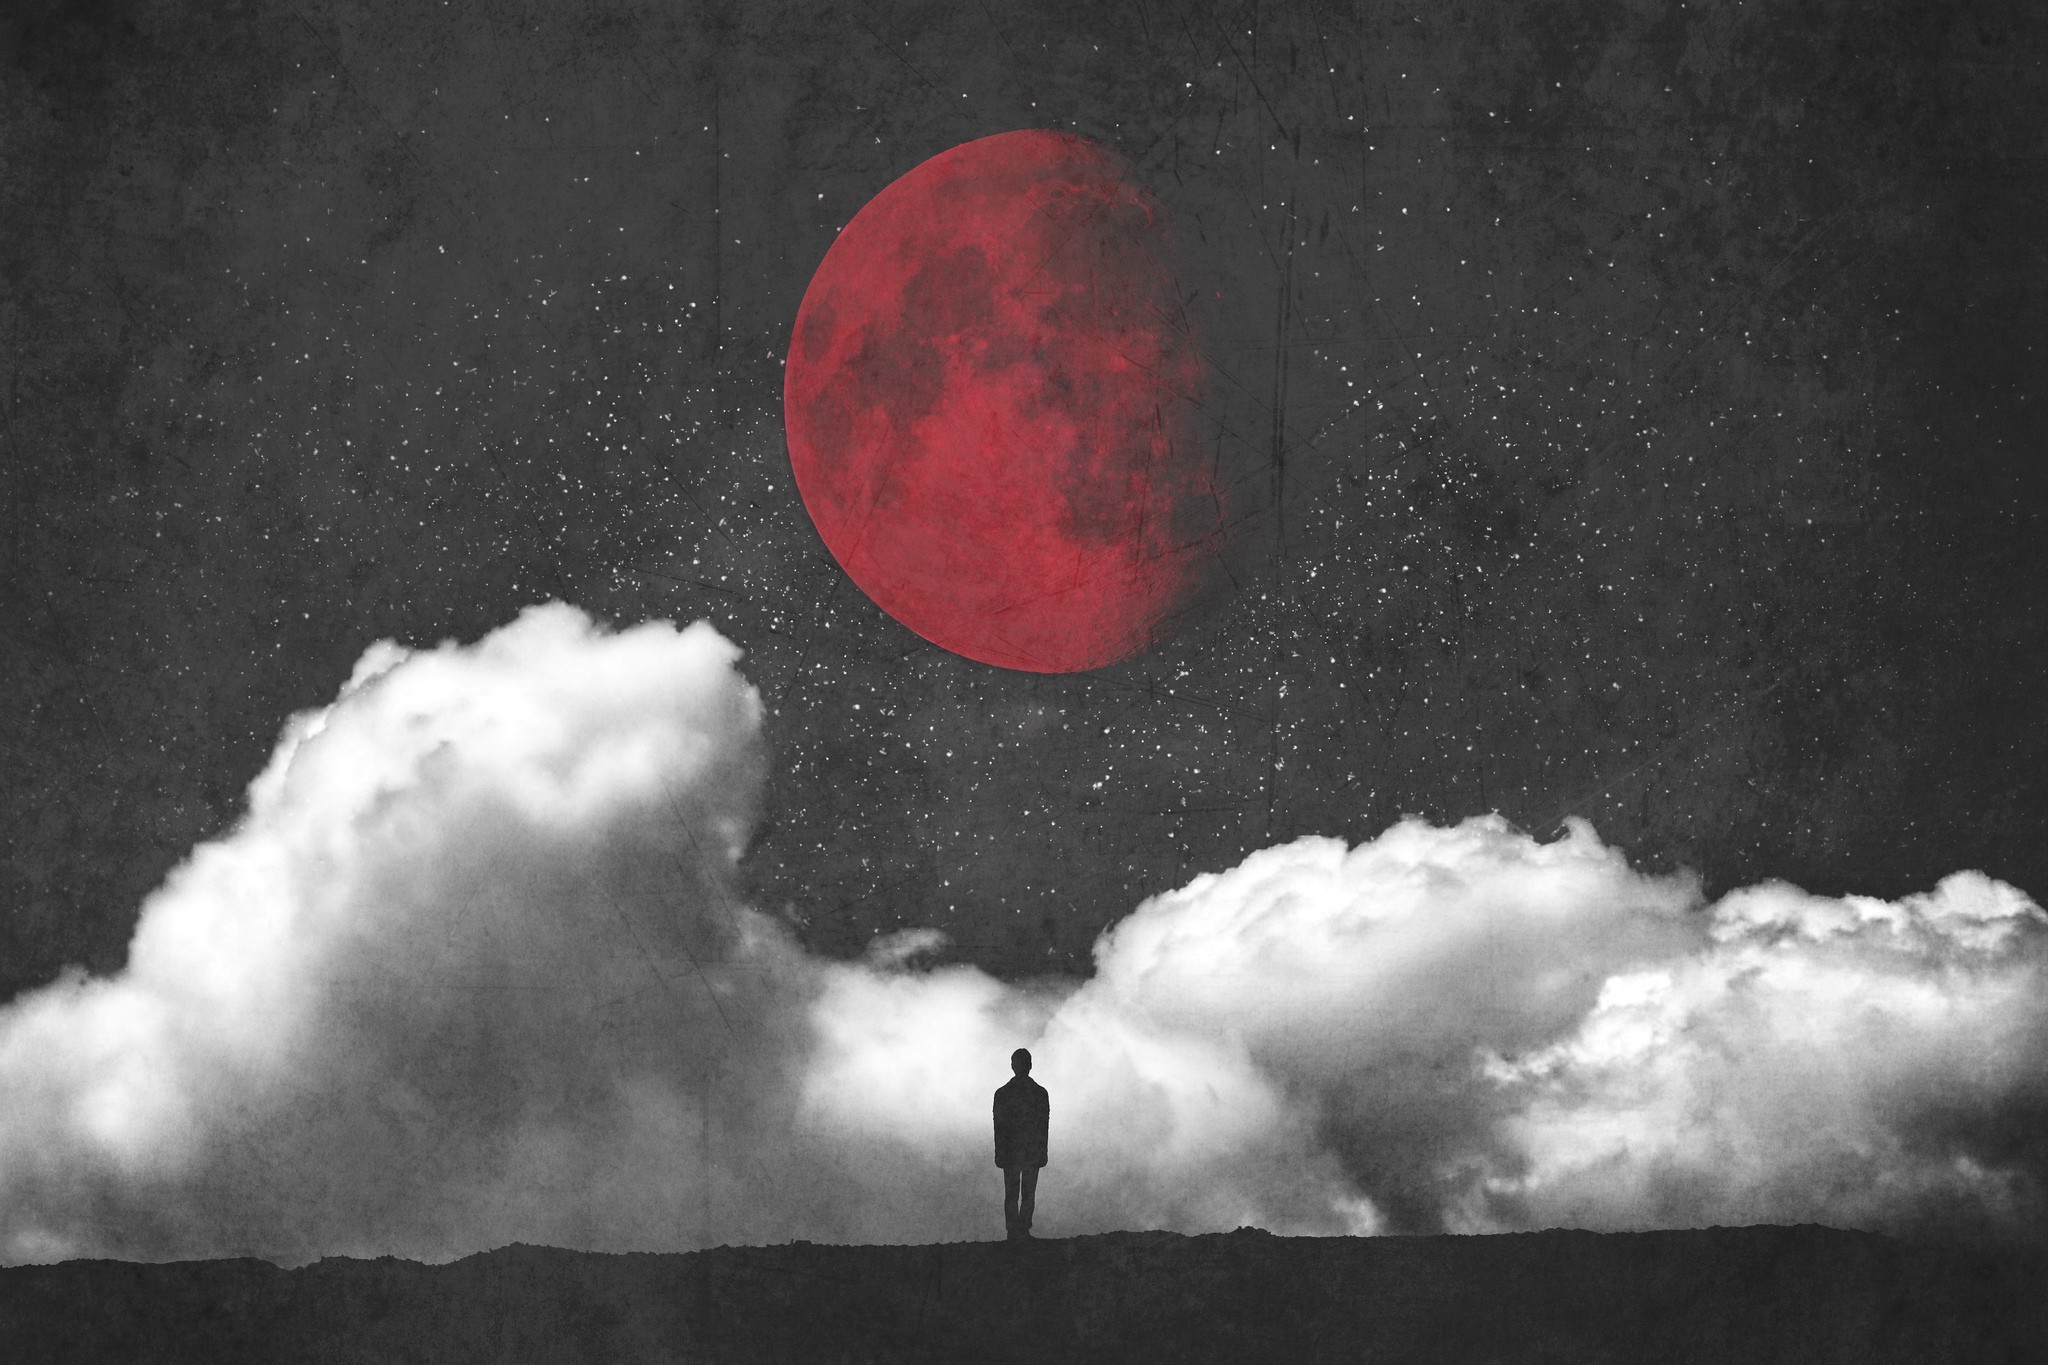 fantasy Art, Red Moon, Moon, Clouds, Minimalism, Silhouette Wallpaper